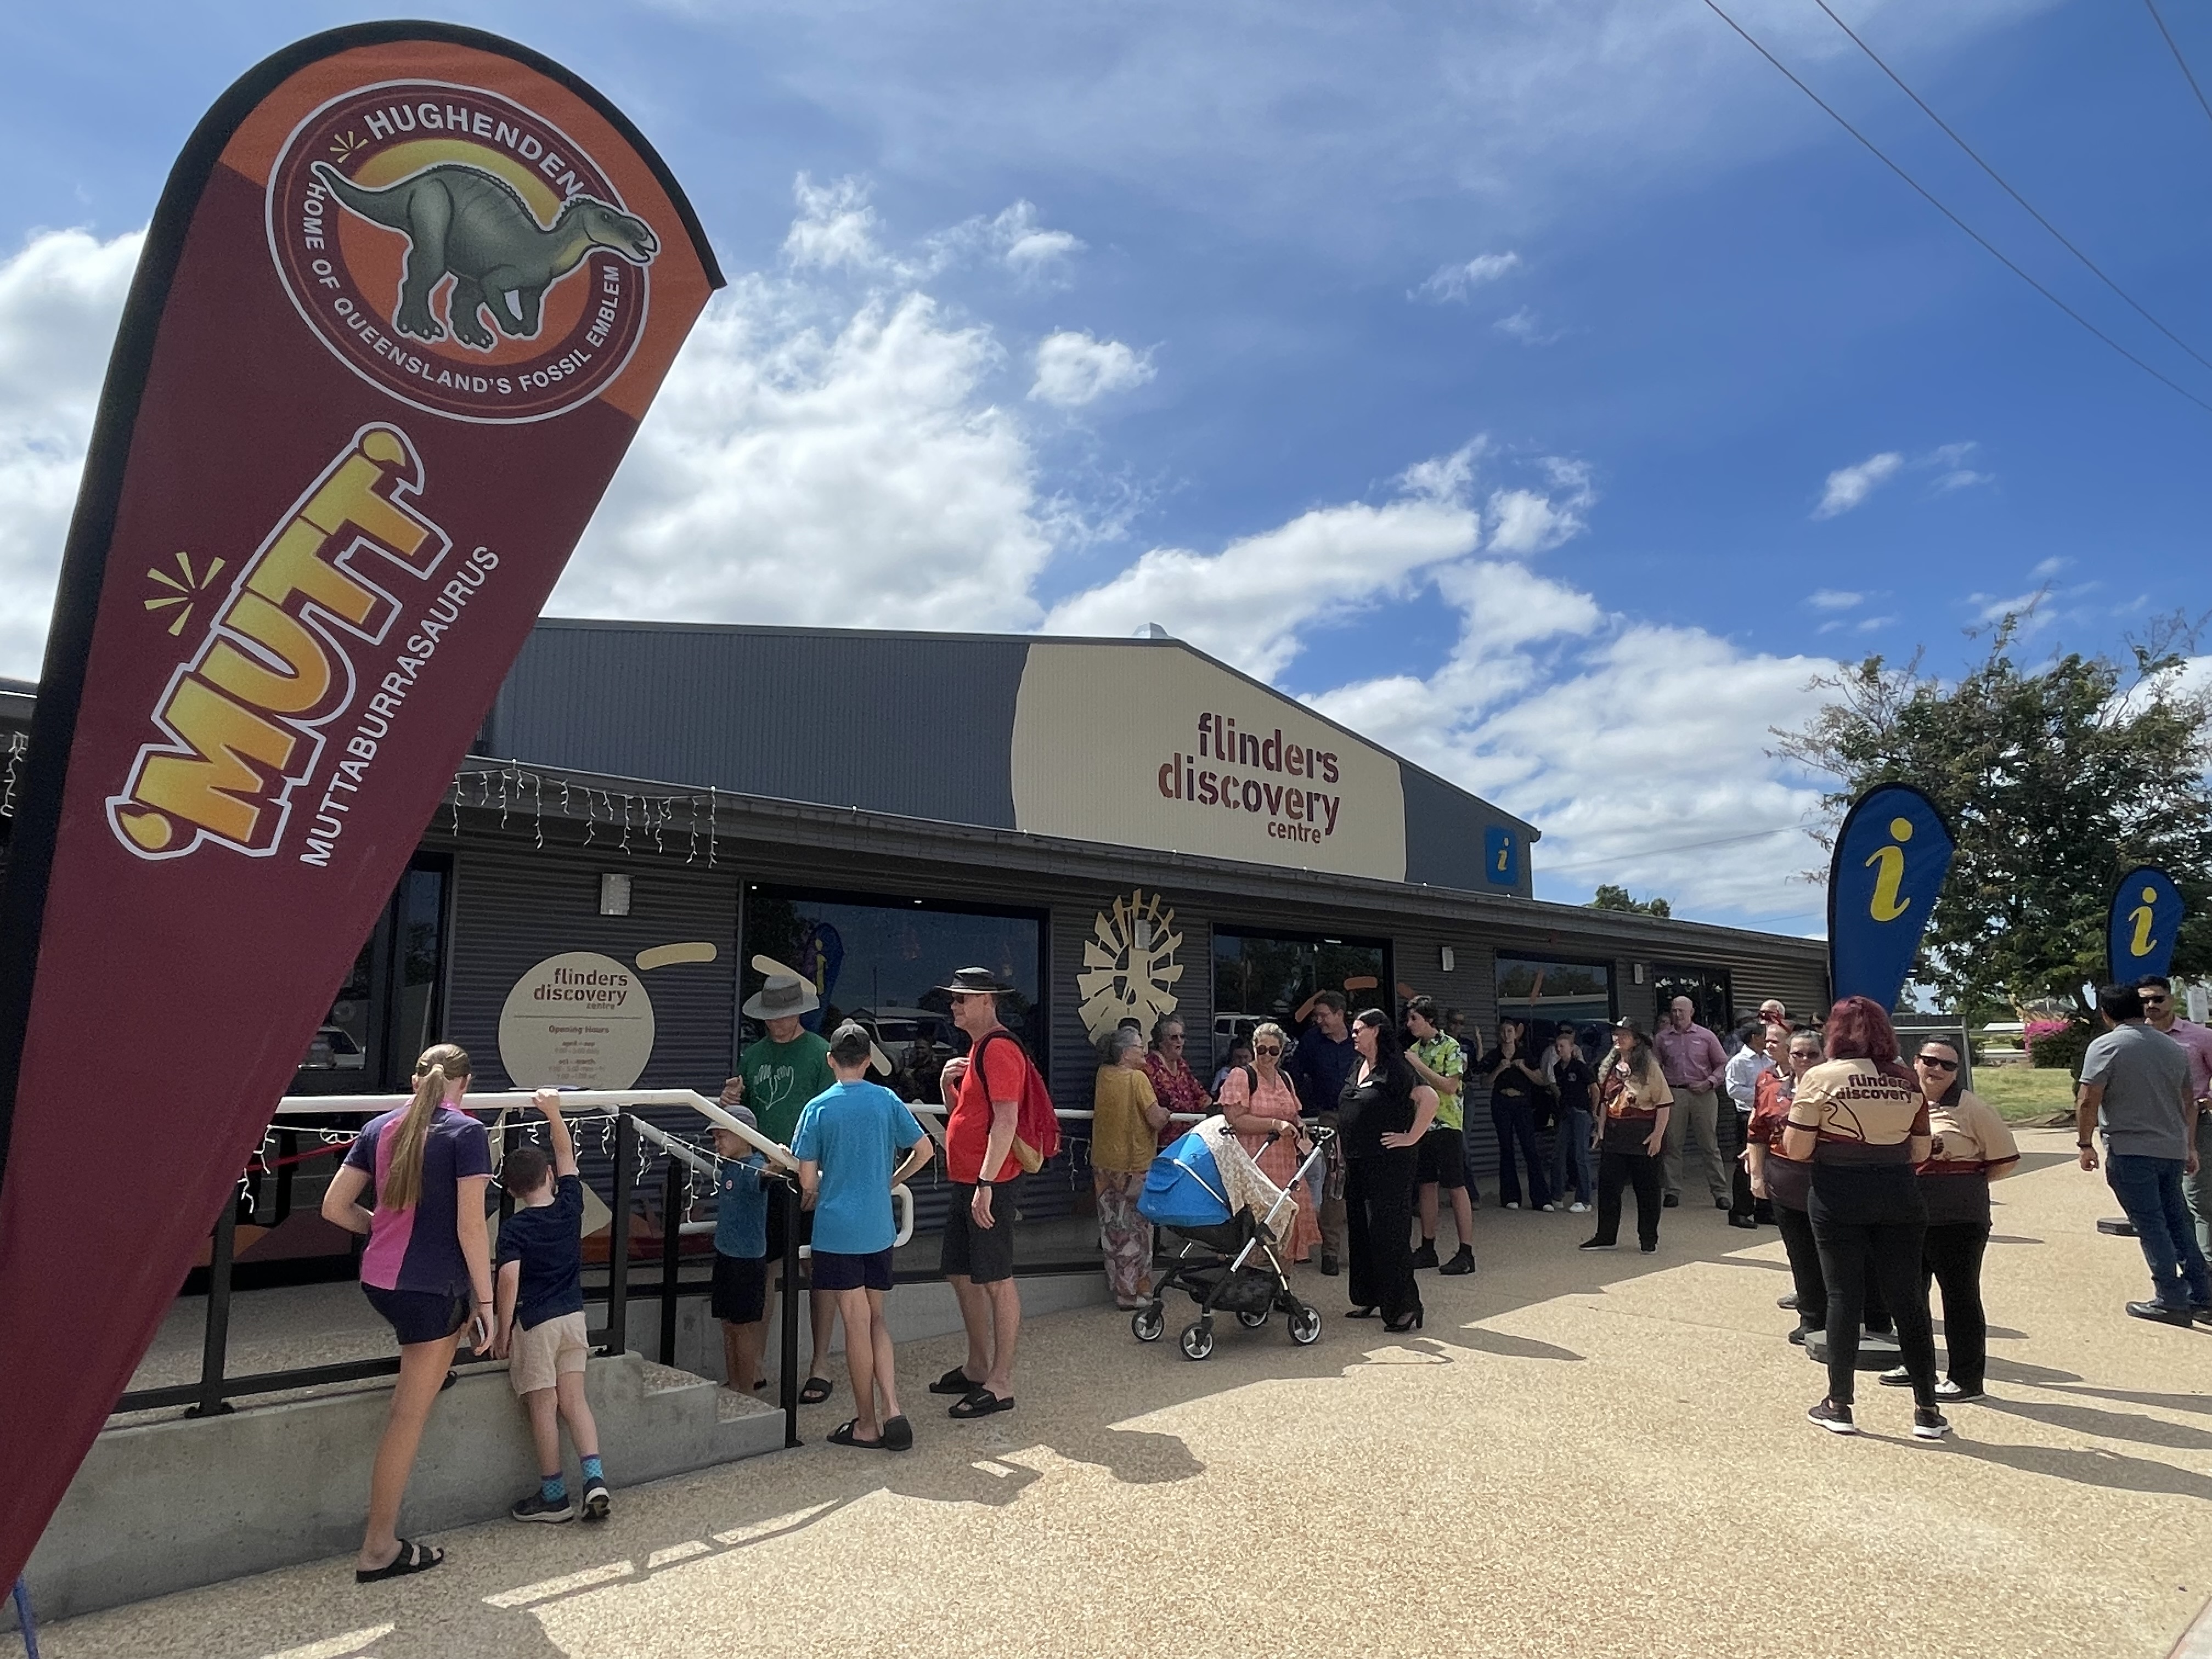 Flinders Discovery Centre in Hughenden was delighted to recently host its grand reopening, with Chris Whiting MP and other key stakeholders in attendance.